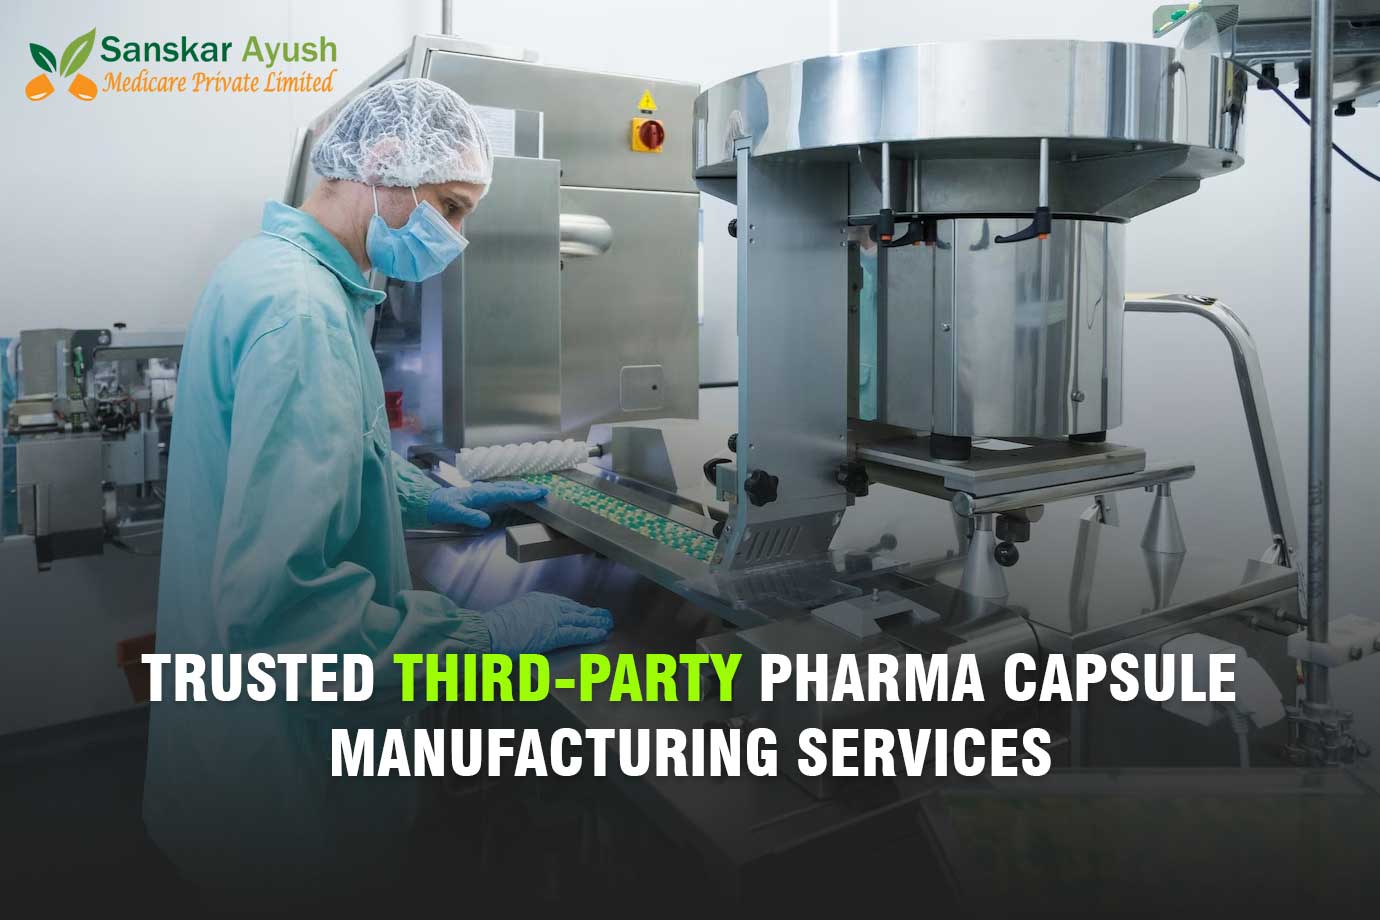 Third-Party Pharma Capsule Manufacturing Services